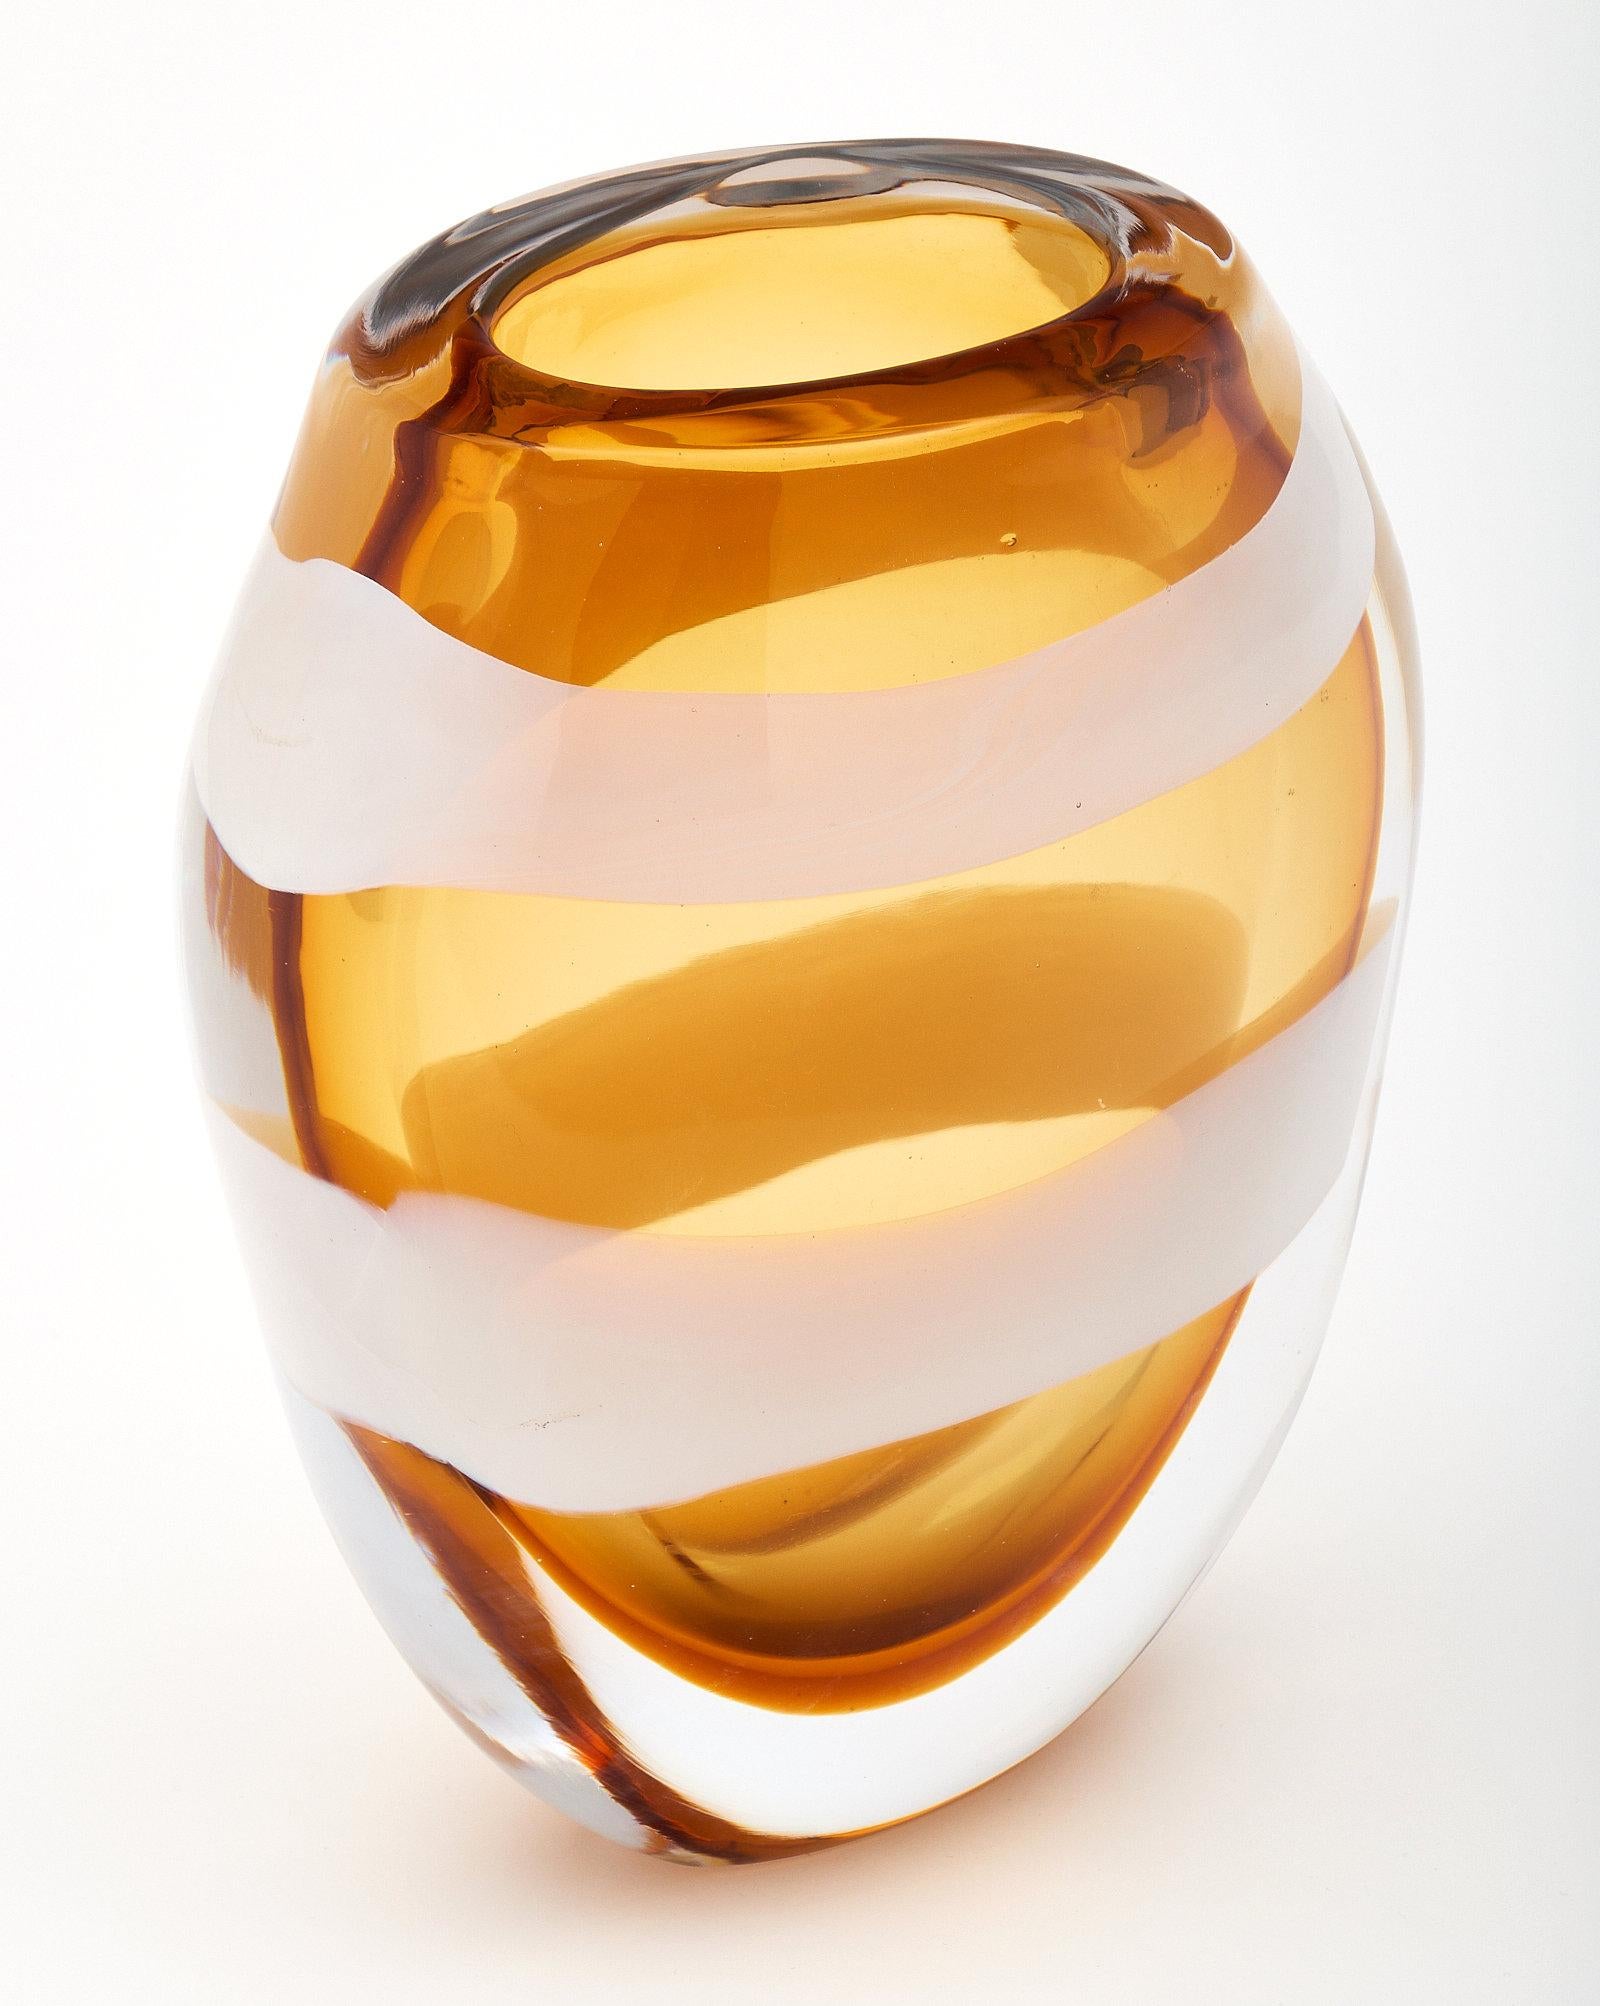 Vintage Murano glass amber vase by maestro Pino Signoretto. This beautiful vase is made of amber colored glass with opaline swirls. It has been signed by maestro Pino Signoretto!